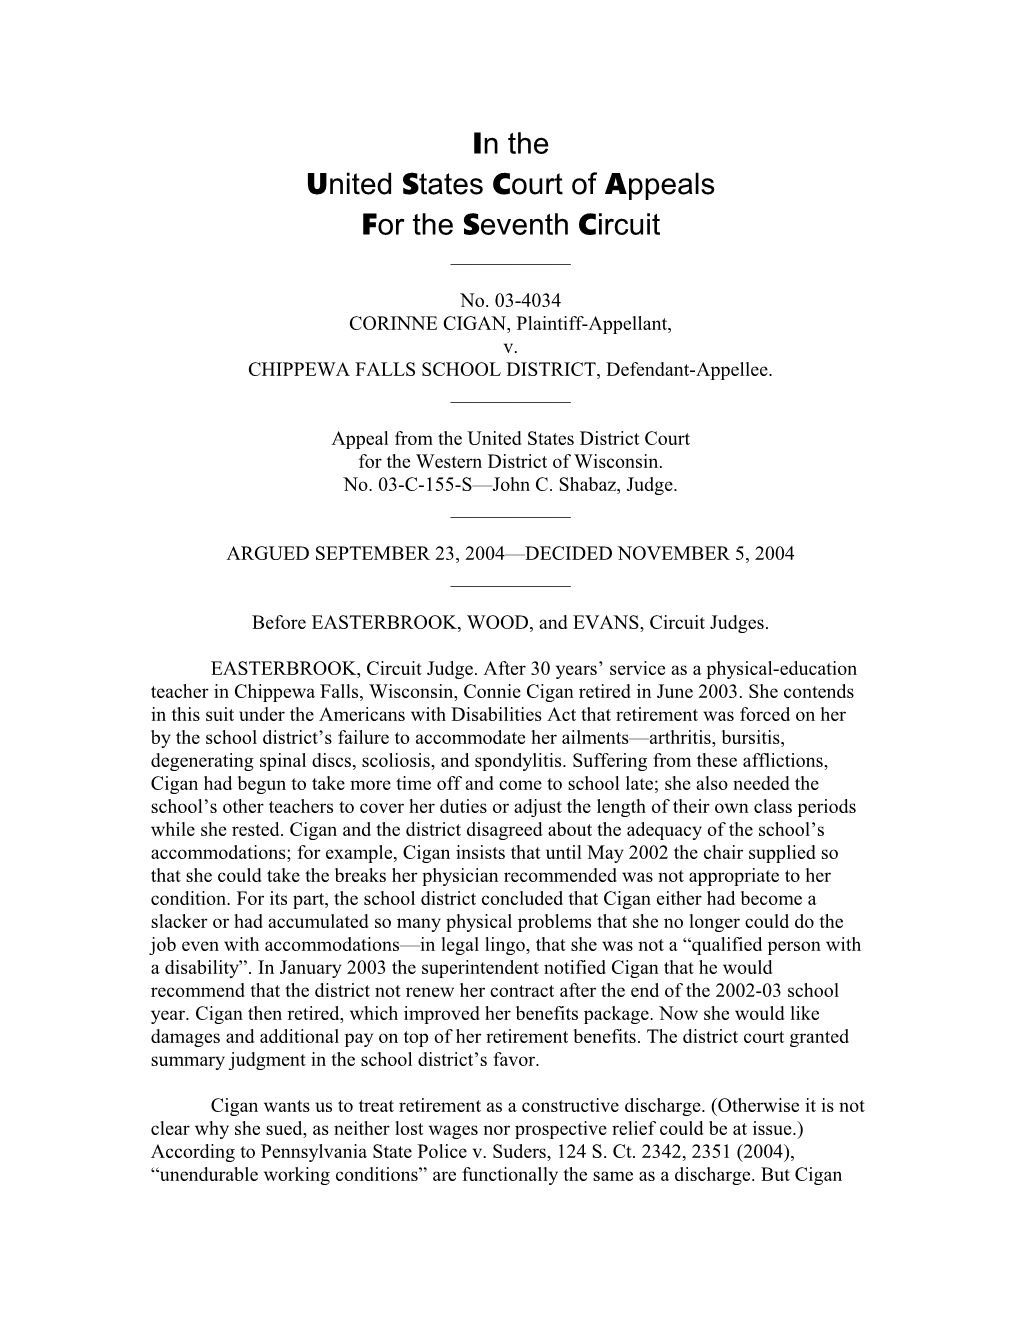 United States Court of a Ppeals